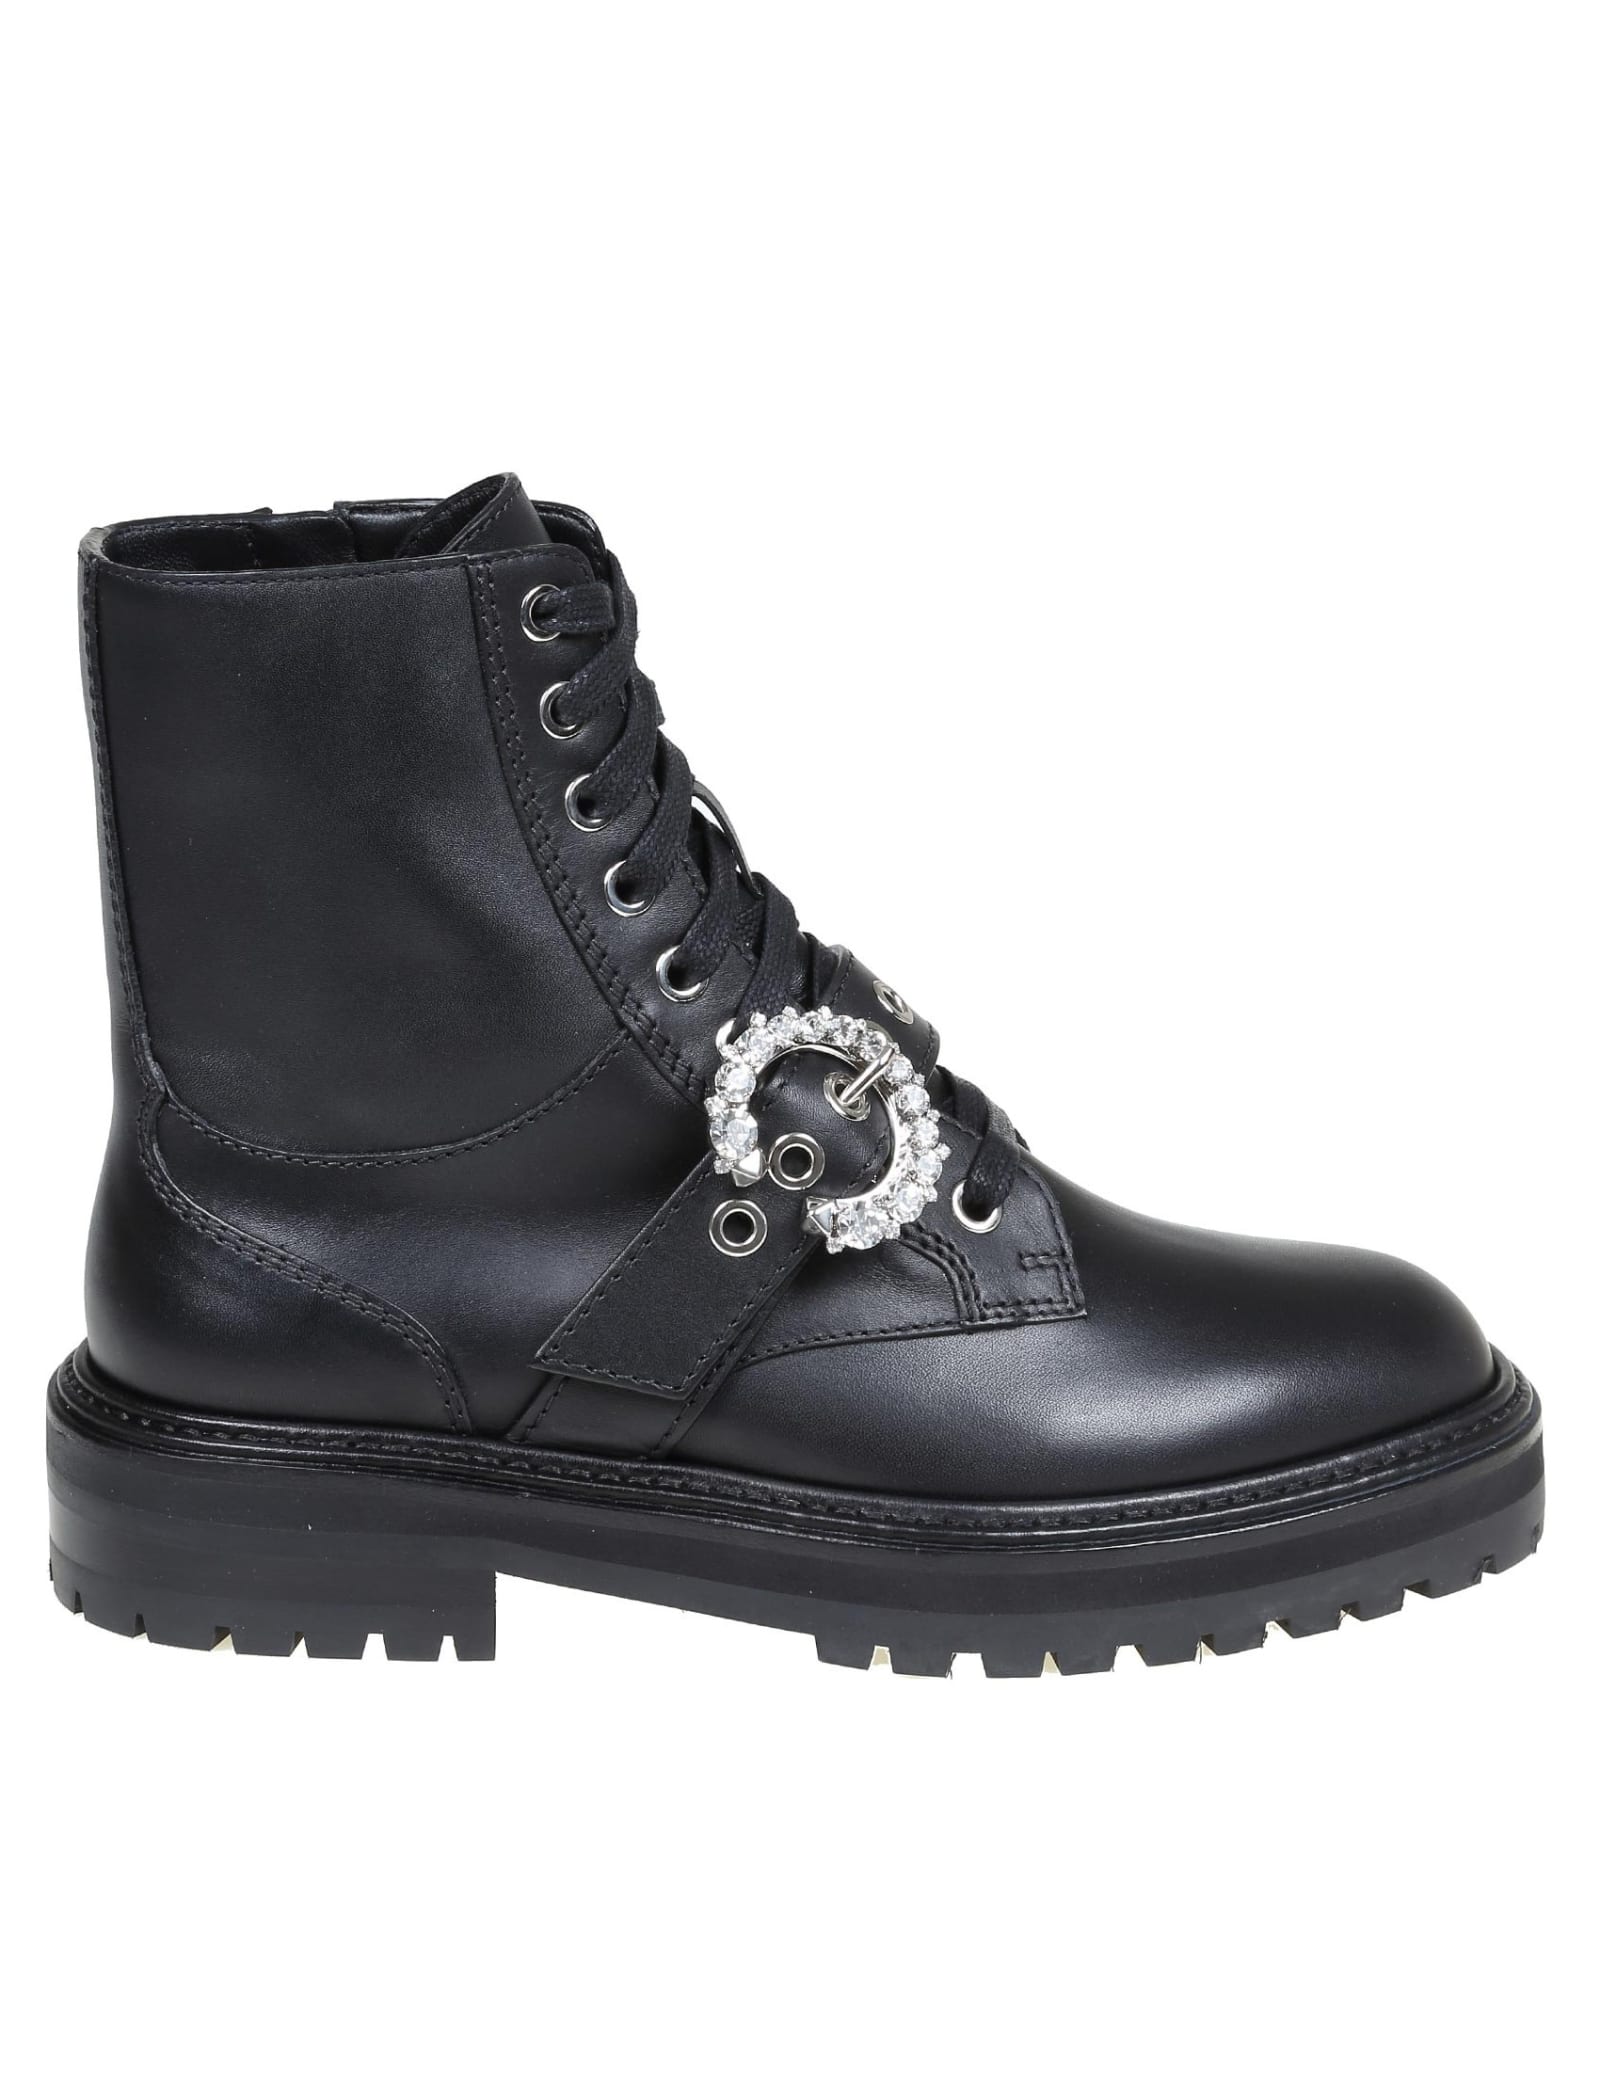 Buy Jimmy Choo Cora Boots In Black Leather online, shop Jimmy Choo shoes with free shipping